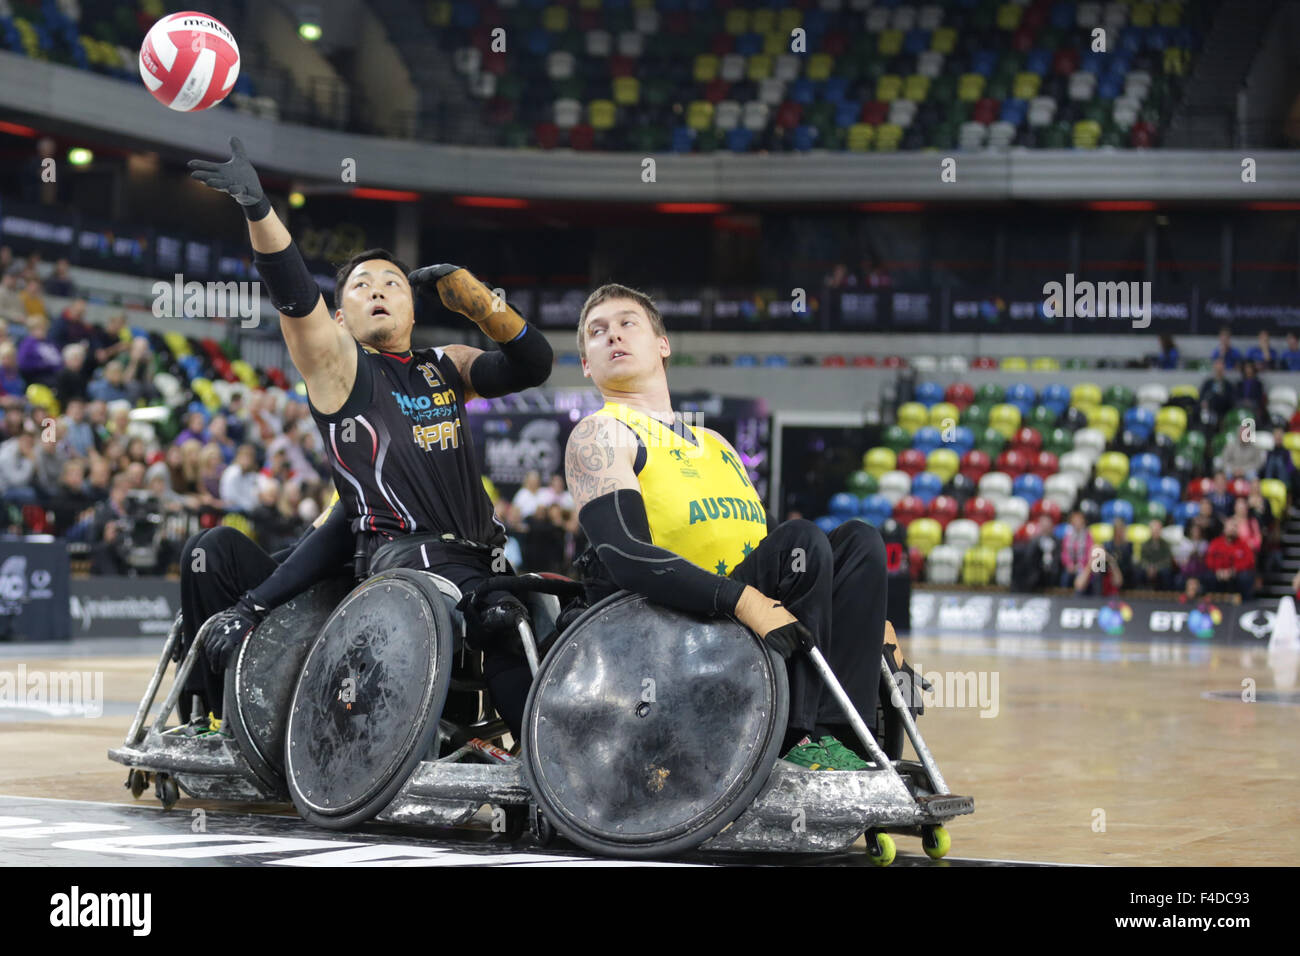 London, UK. 16th October, 2015. World Wheelchair Rugby Challenge Team Aus beat Japan 60-55 to win Bronze medal. Copperbox, Olympic Park, London, UK. Japan's Yukinobu catches the ball.16th October, 2015. copyright carol moir/Alamy Live News Stock Photo